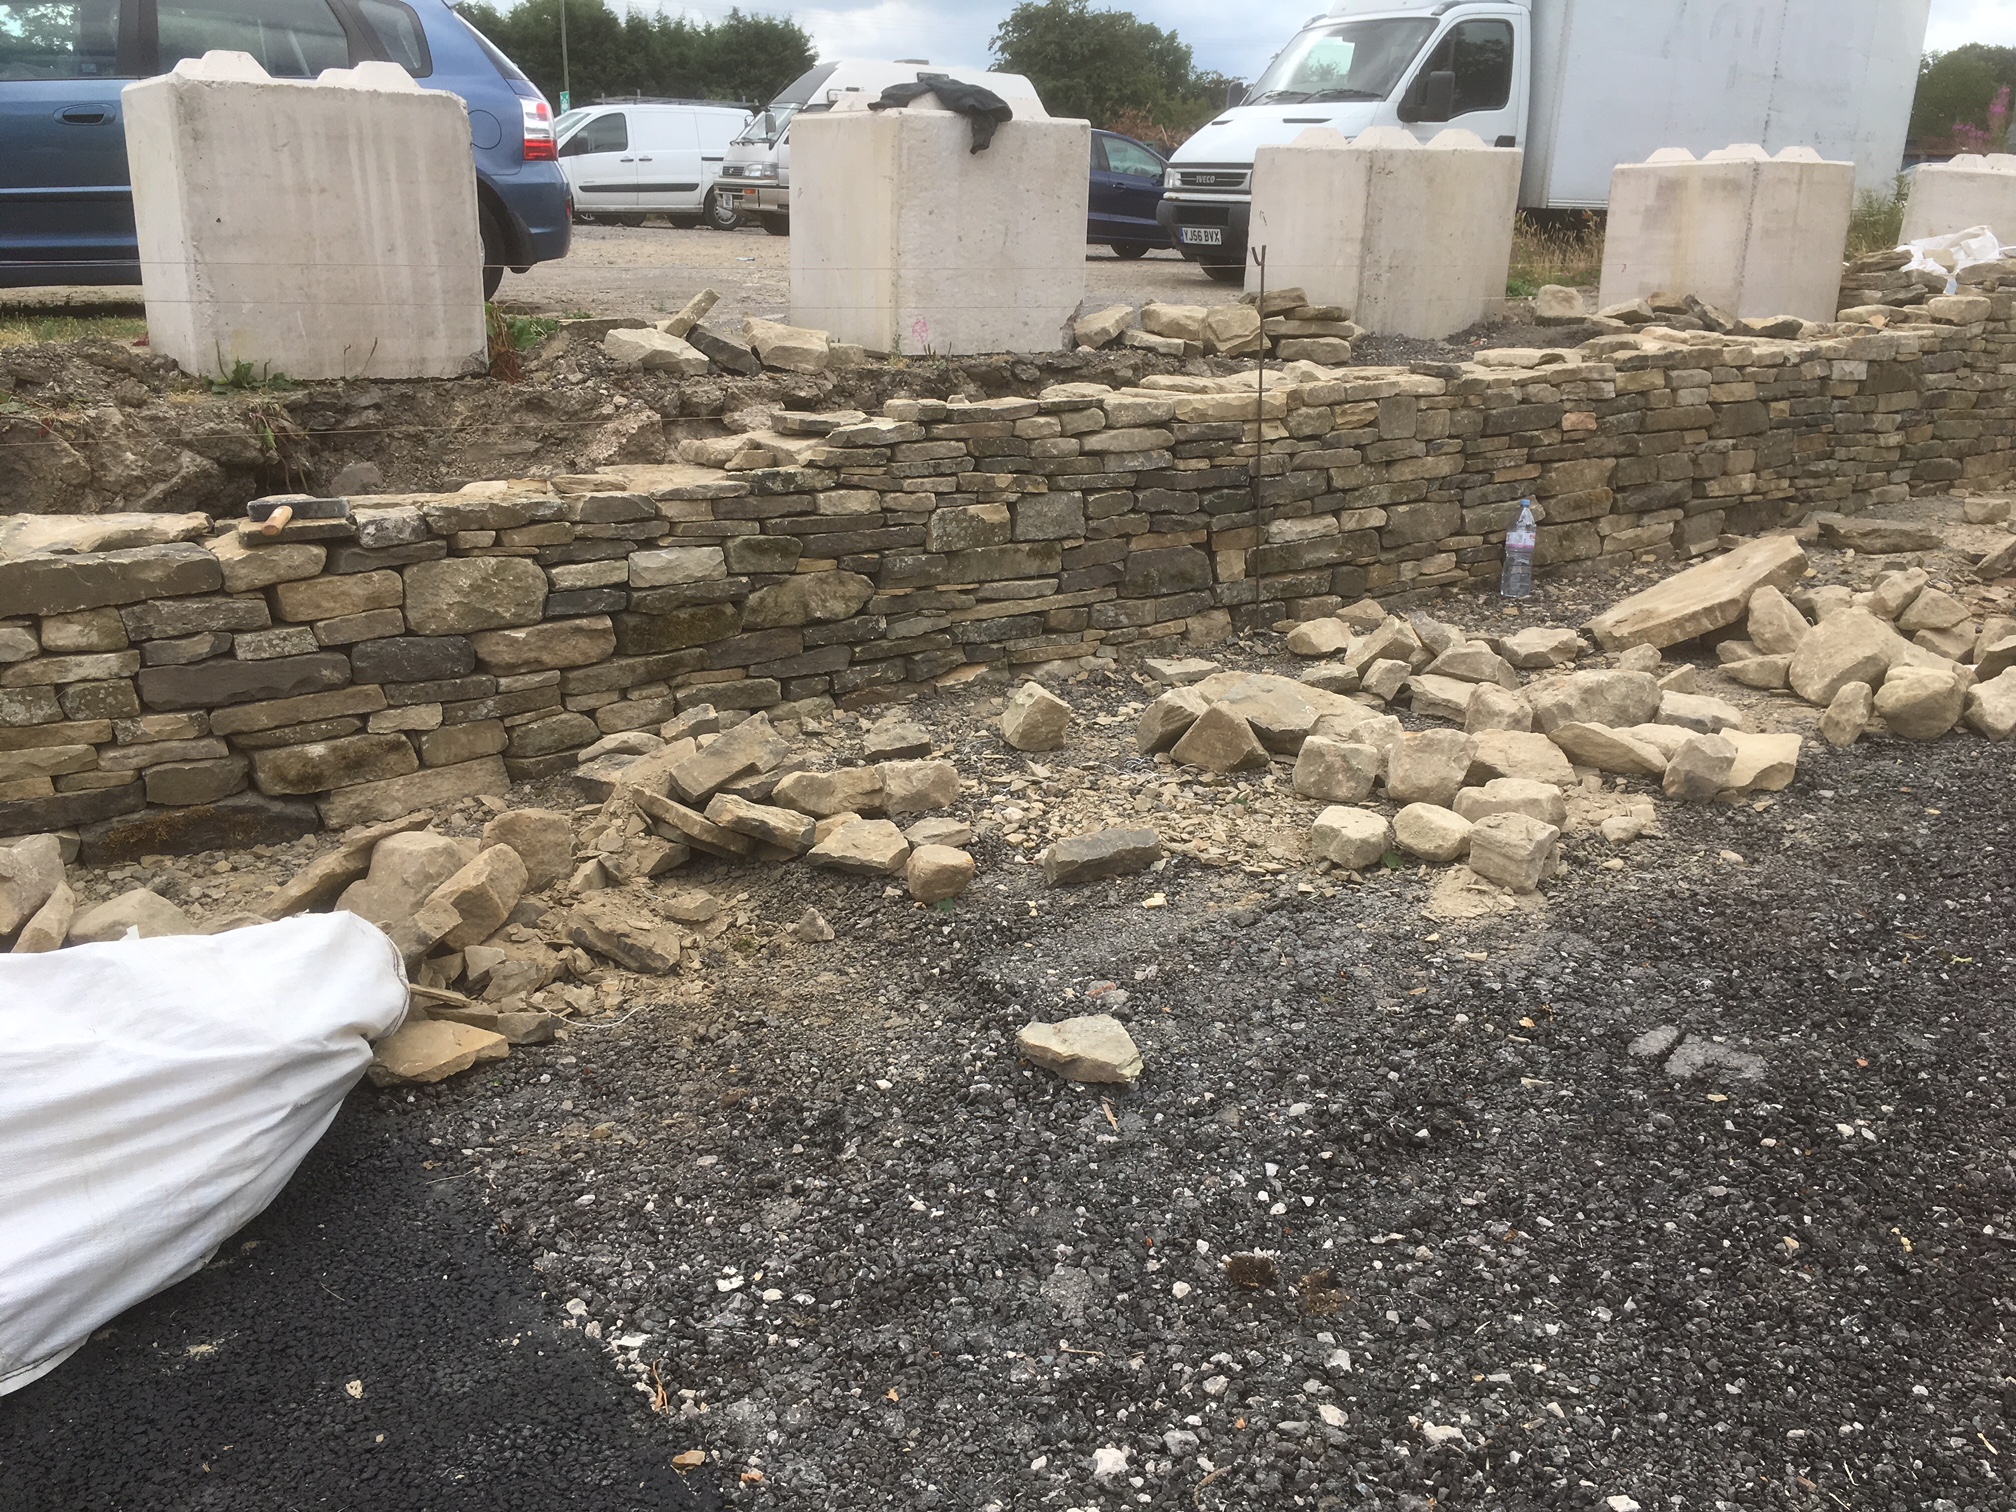 10 bulk bags Yorkshire Dry Stone Walling, each bag 1tonne, which approximately equates to 1m² of - Image 3 of 9